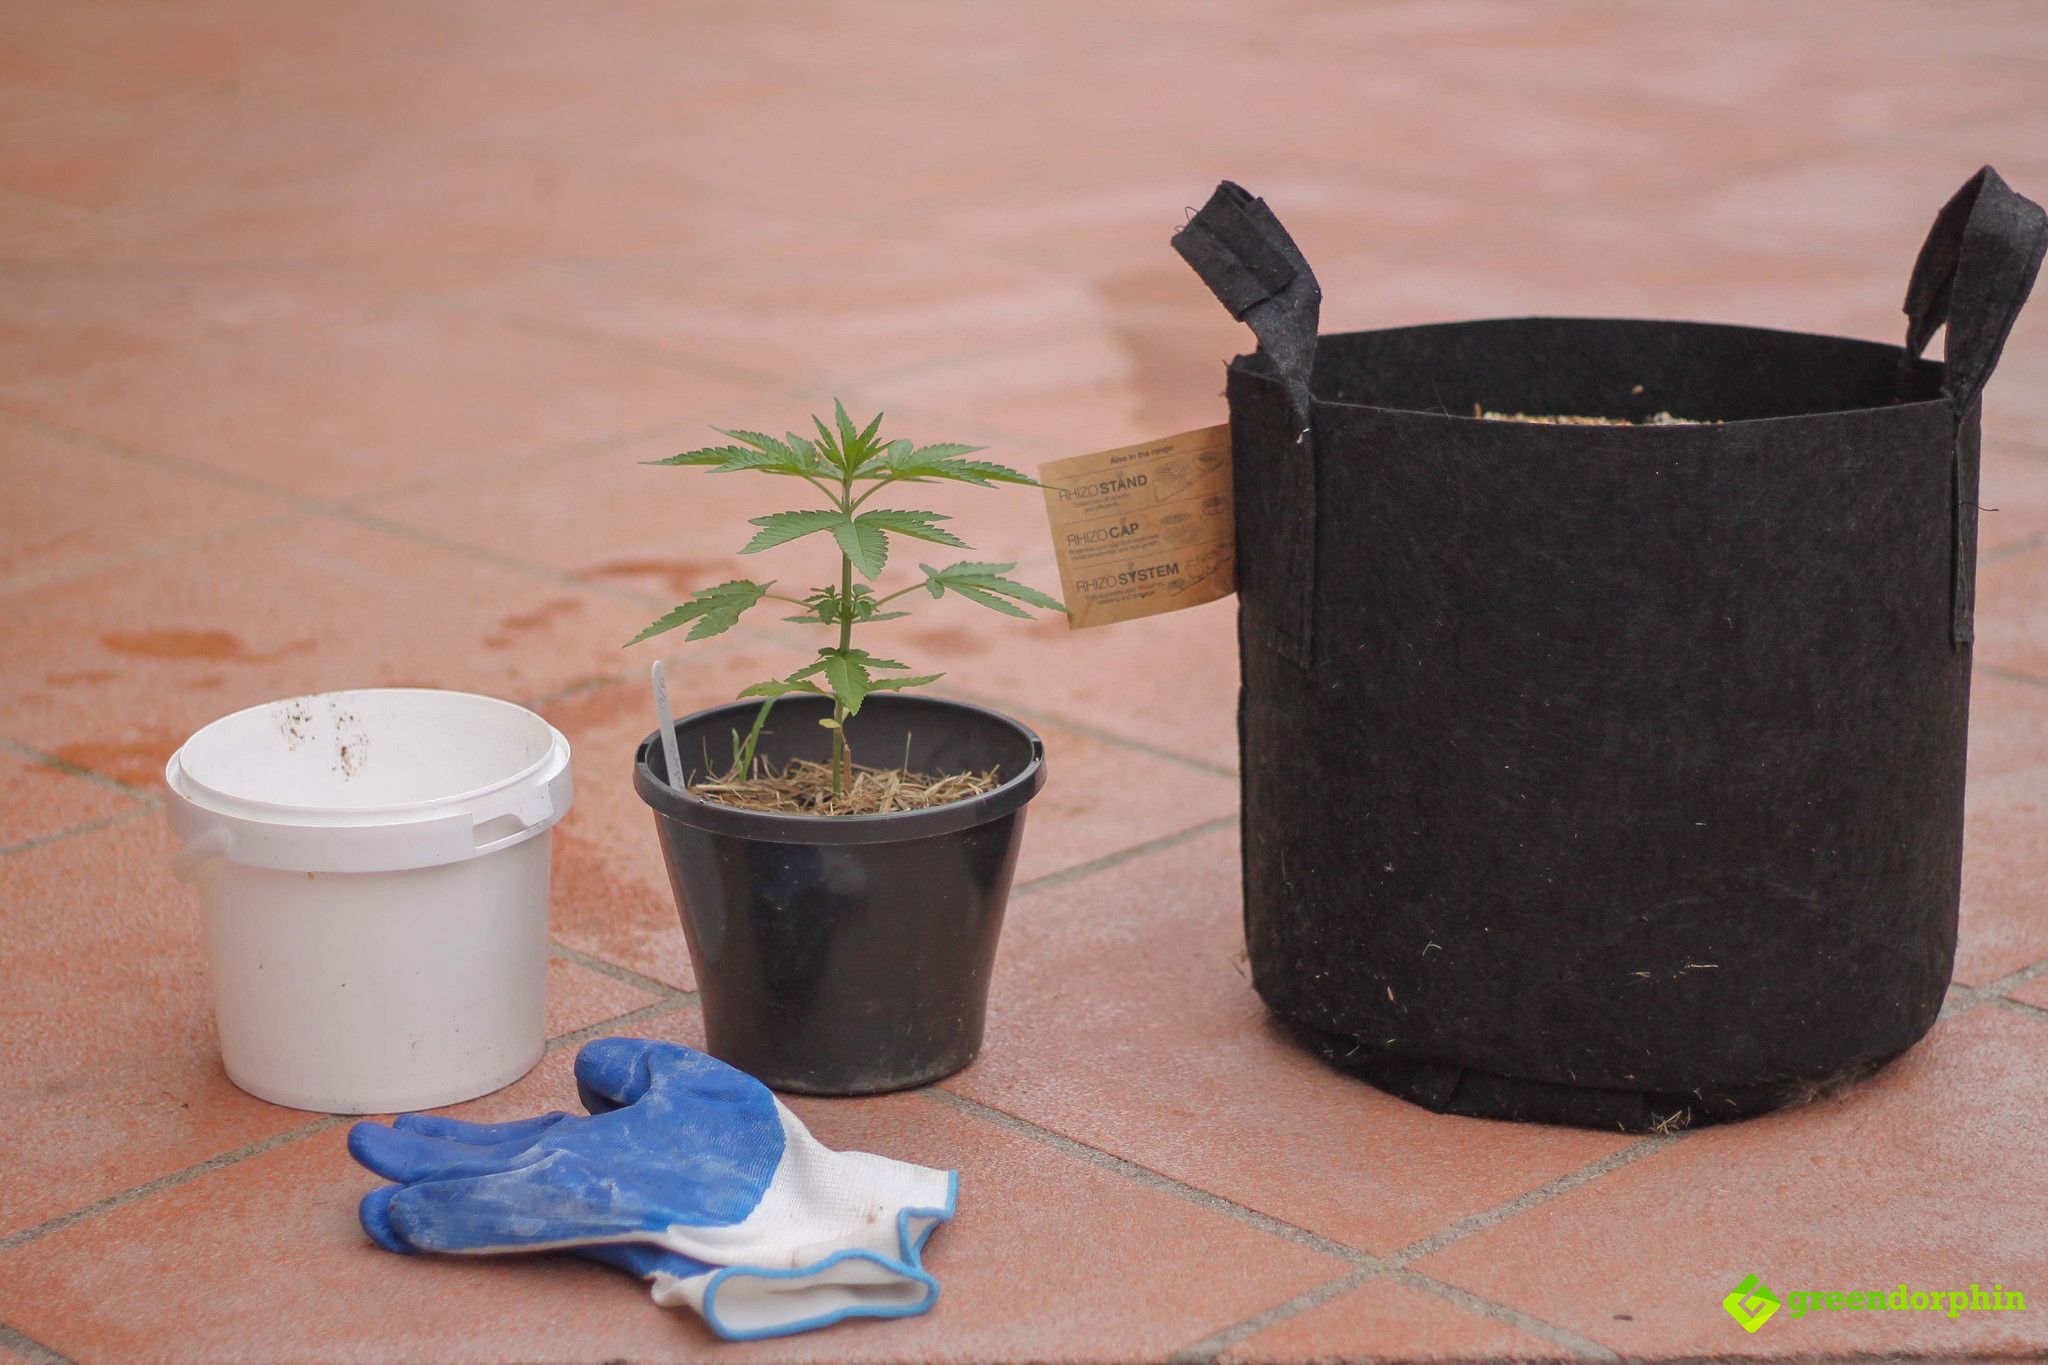 Repot Your Cannabis Plants the test subject